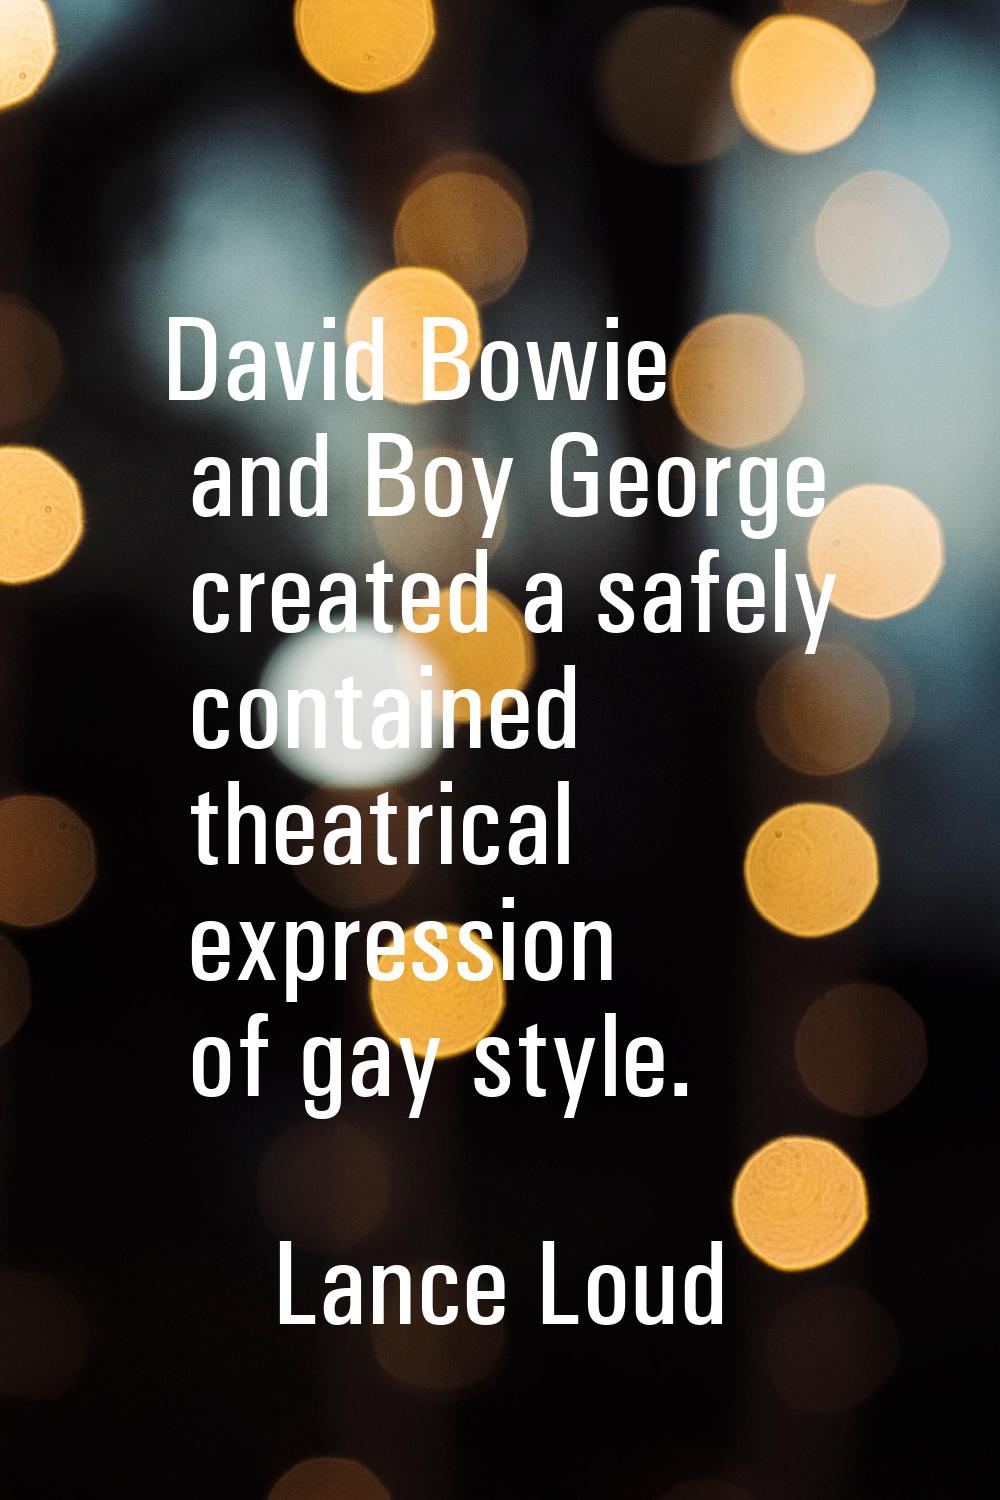 David Bowie and Boy George created a safely contained theatrical expression of gay style.